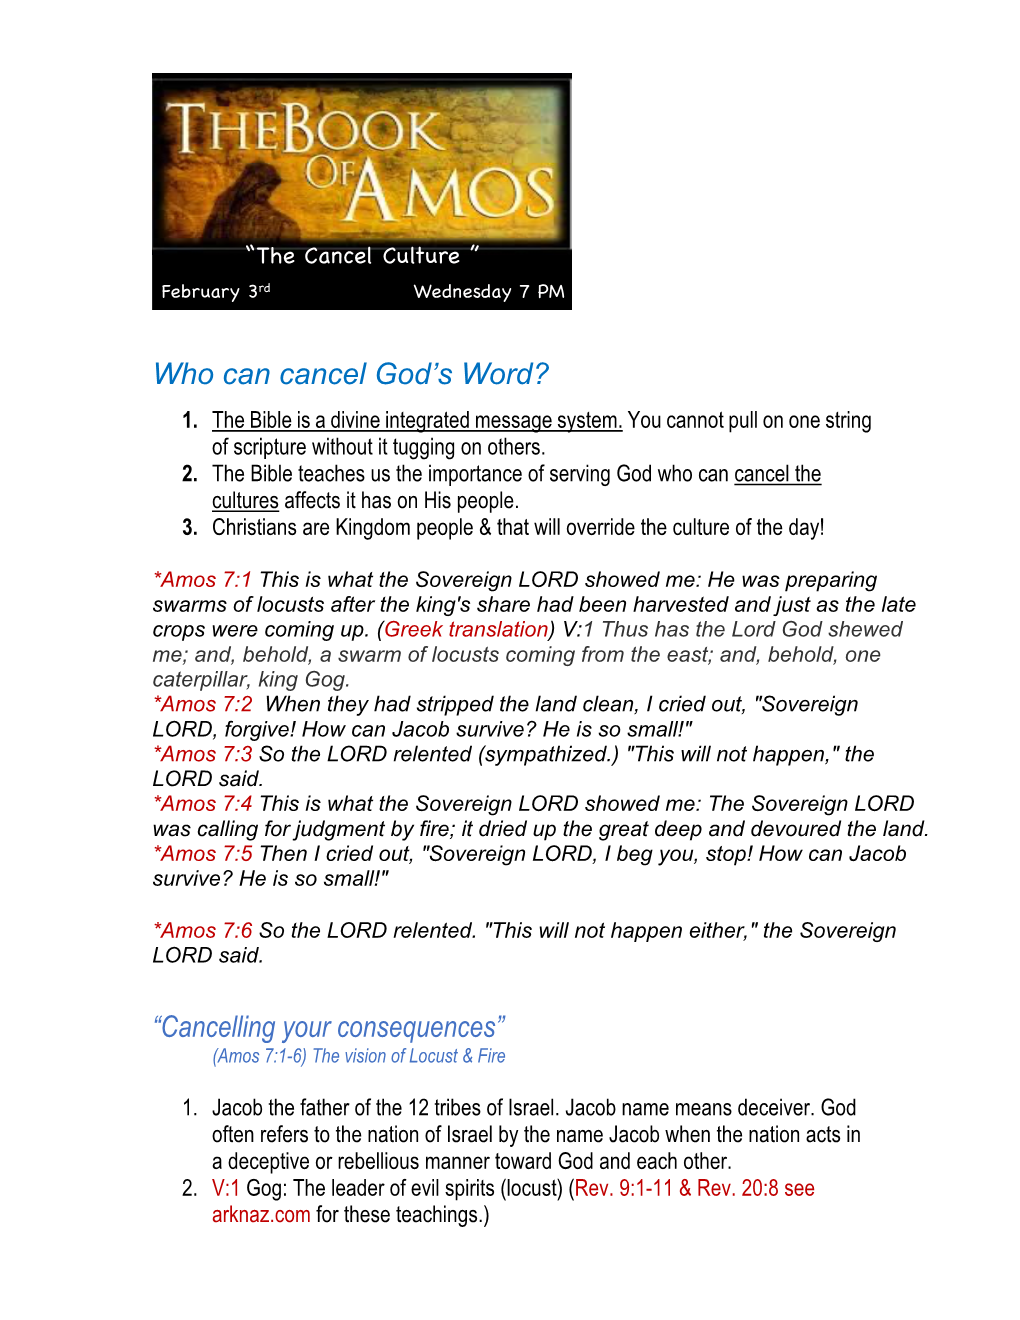 Who Can Cancel God's Word? “Cancelling Your Consequences”